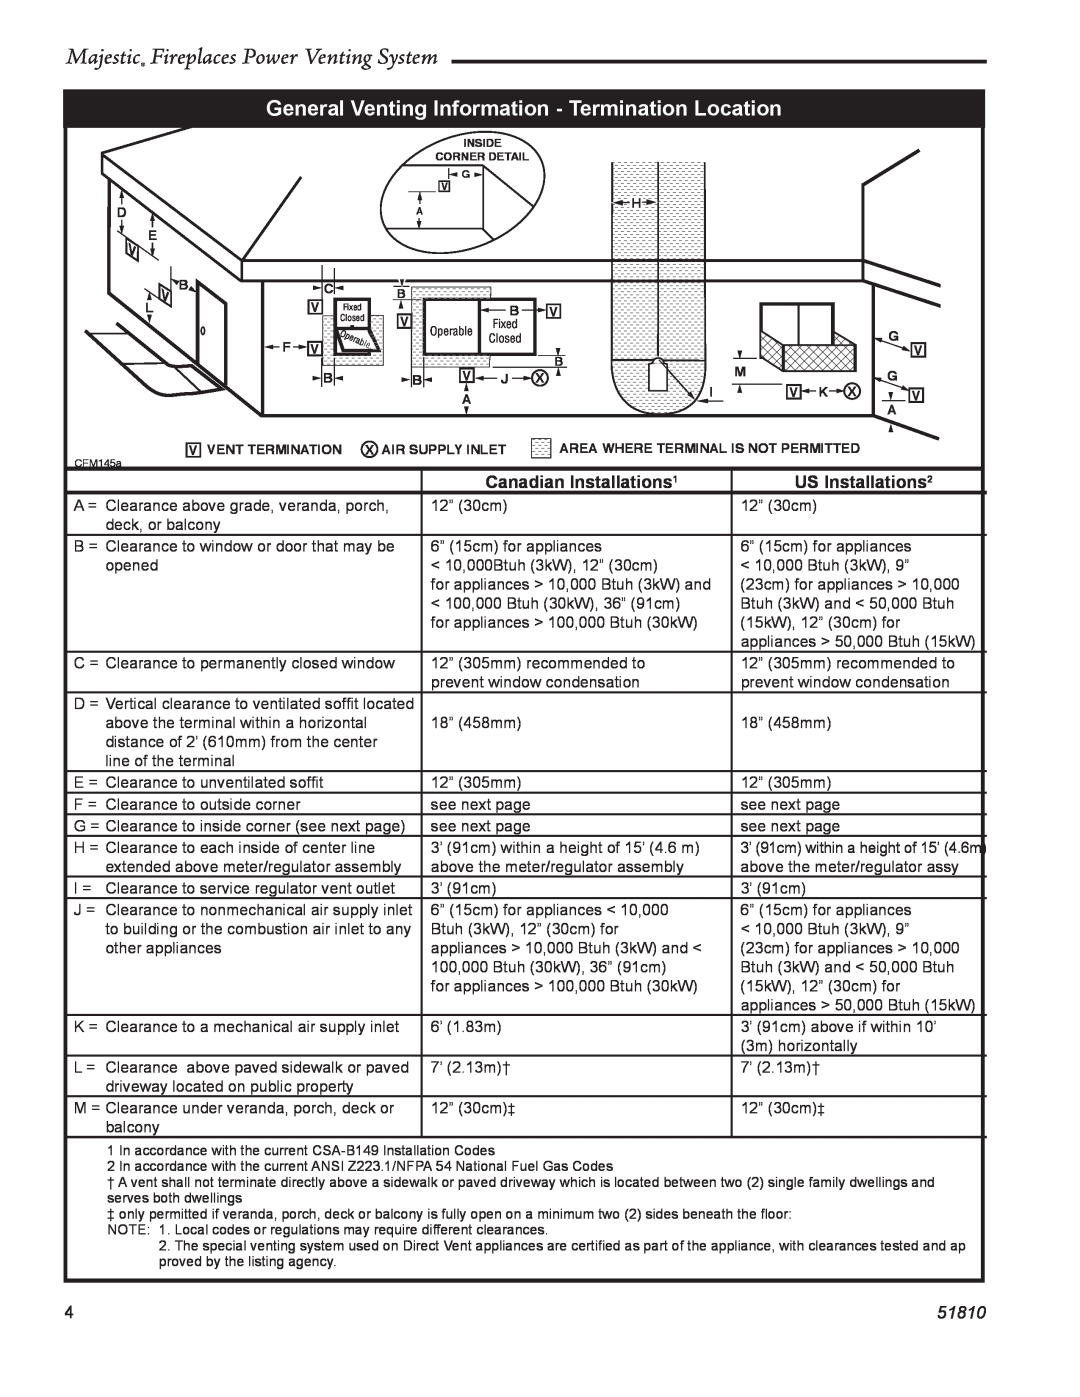 CFM Corporation PVS-1 General Venting Information - Termination Location, Majestic Fireplaces Power Venting System, 51810 